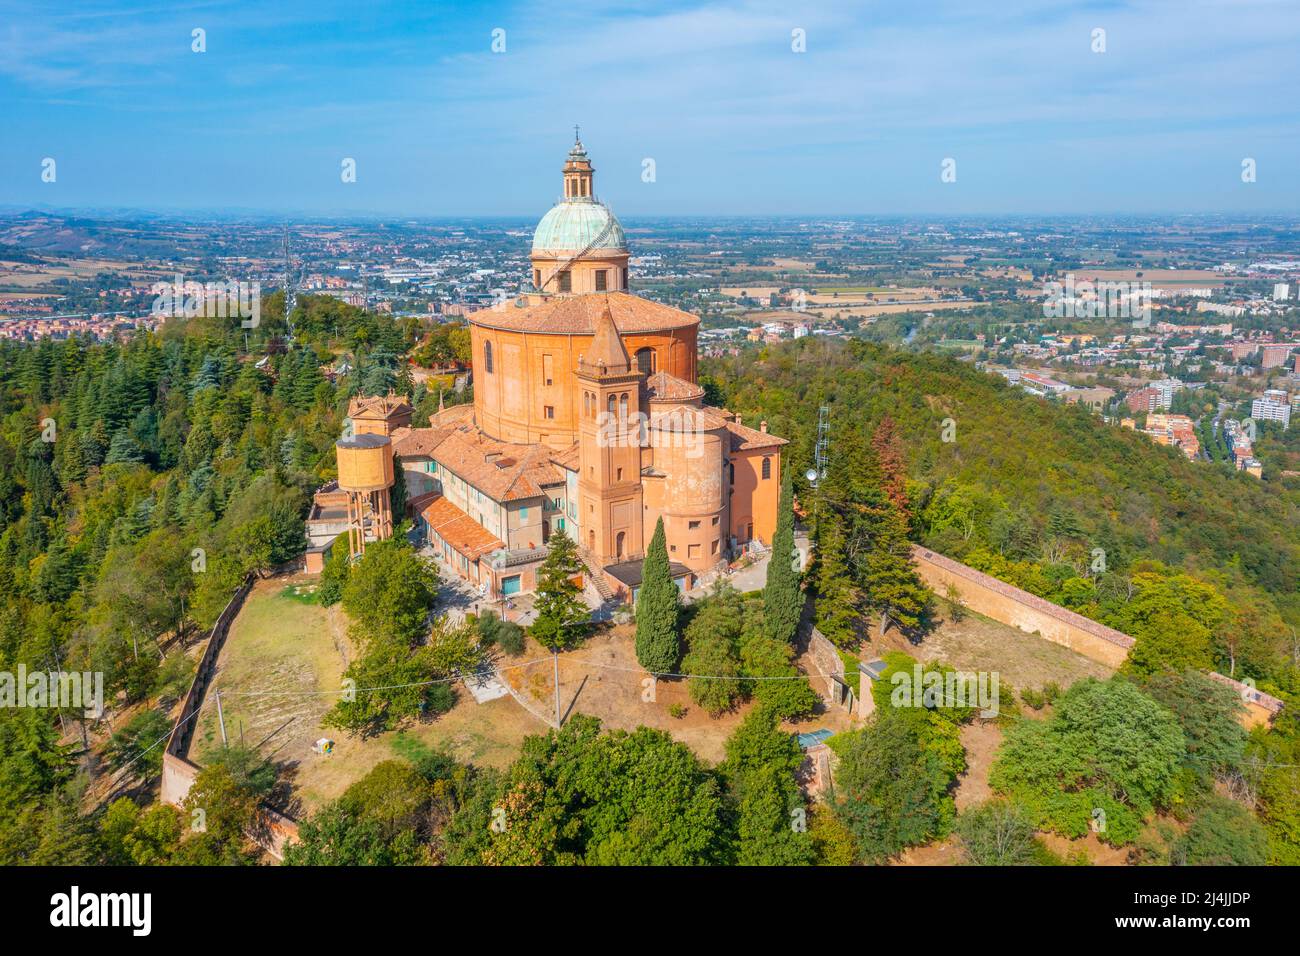 Aerial view of Sanctuary of the Madonna di San Luca in Bologna, Italy. Stock Photo